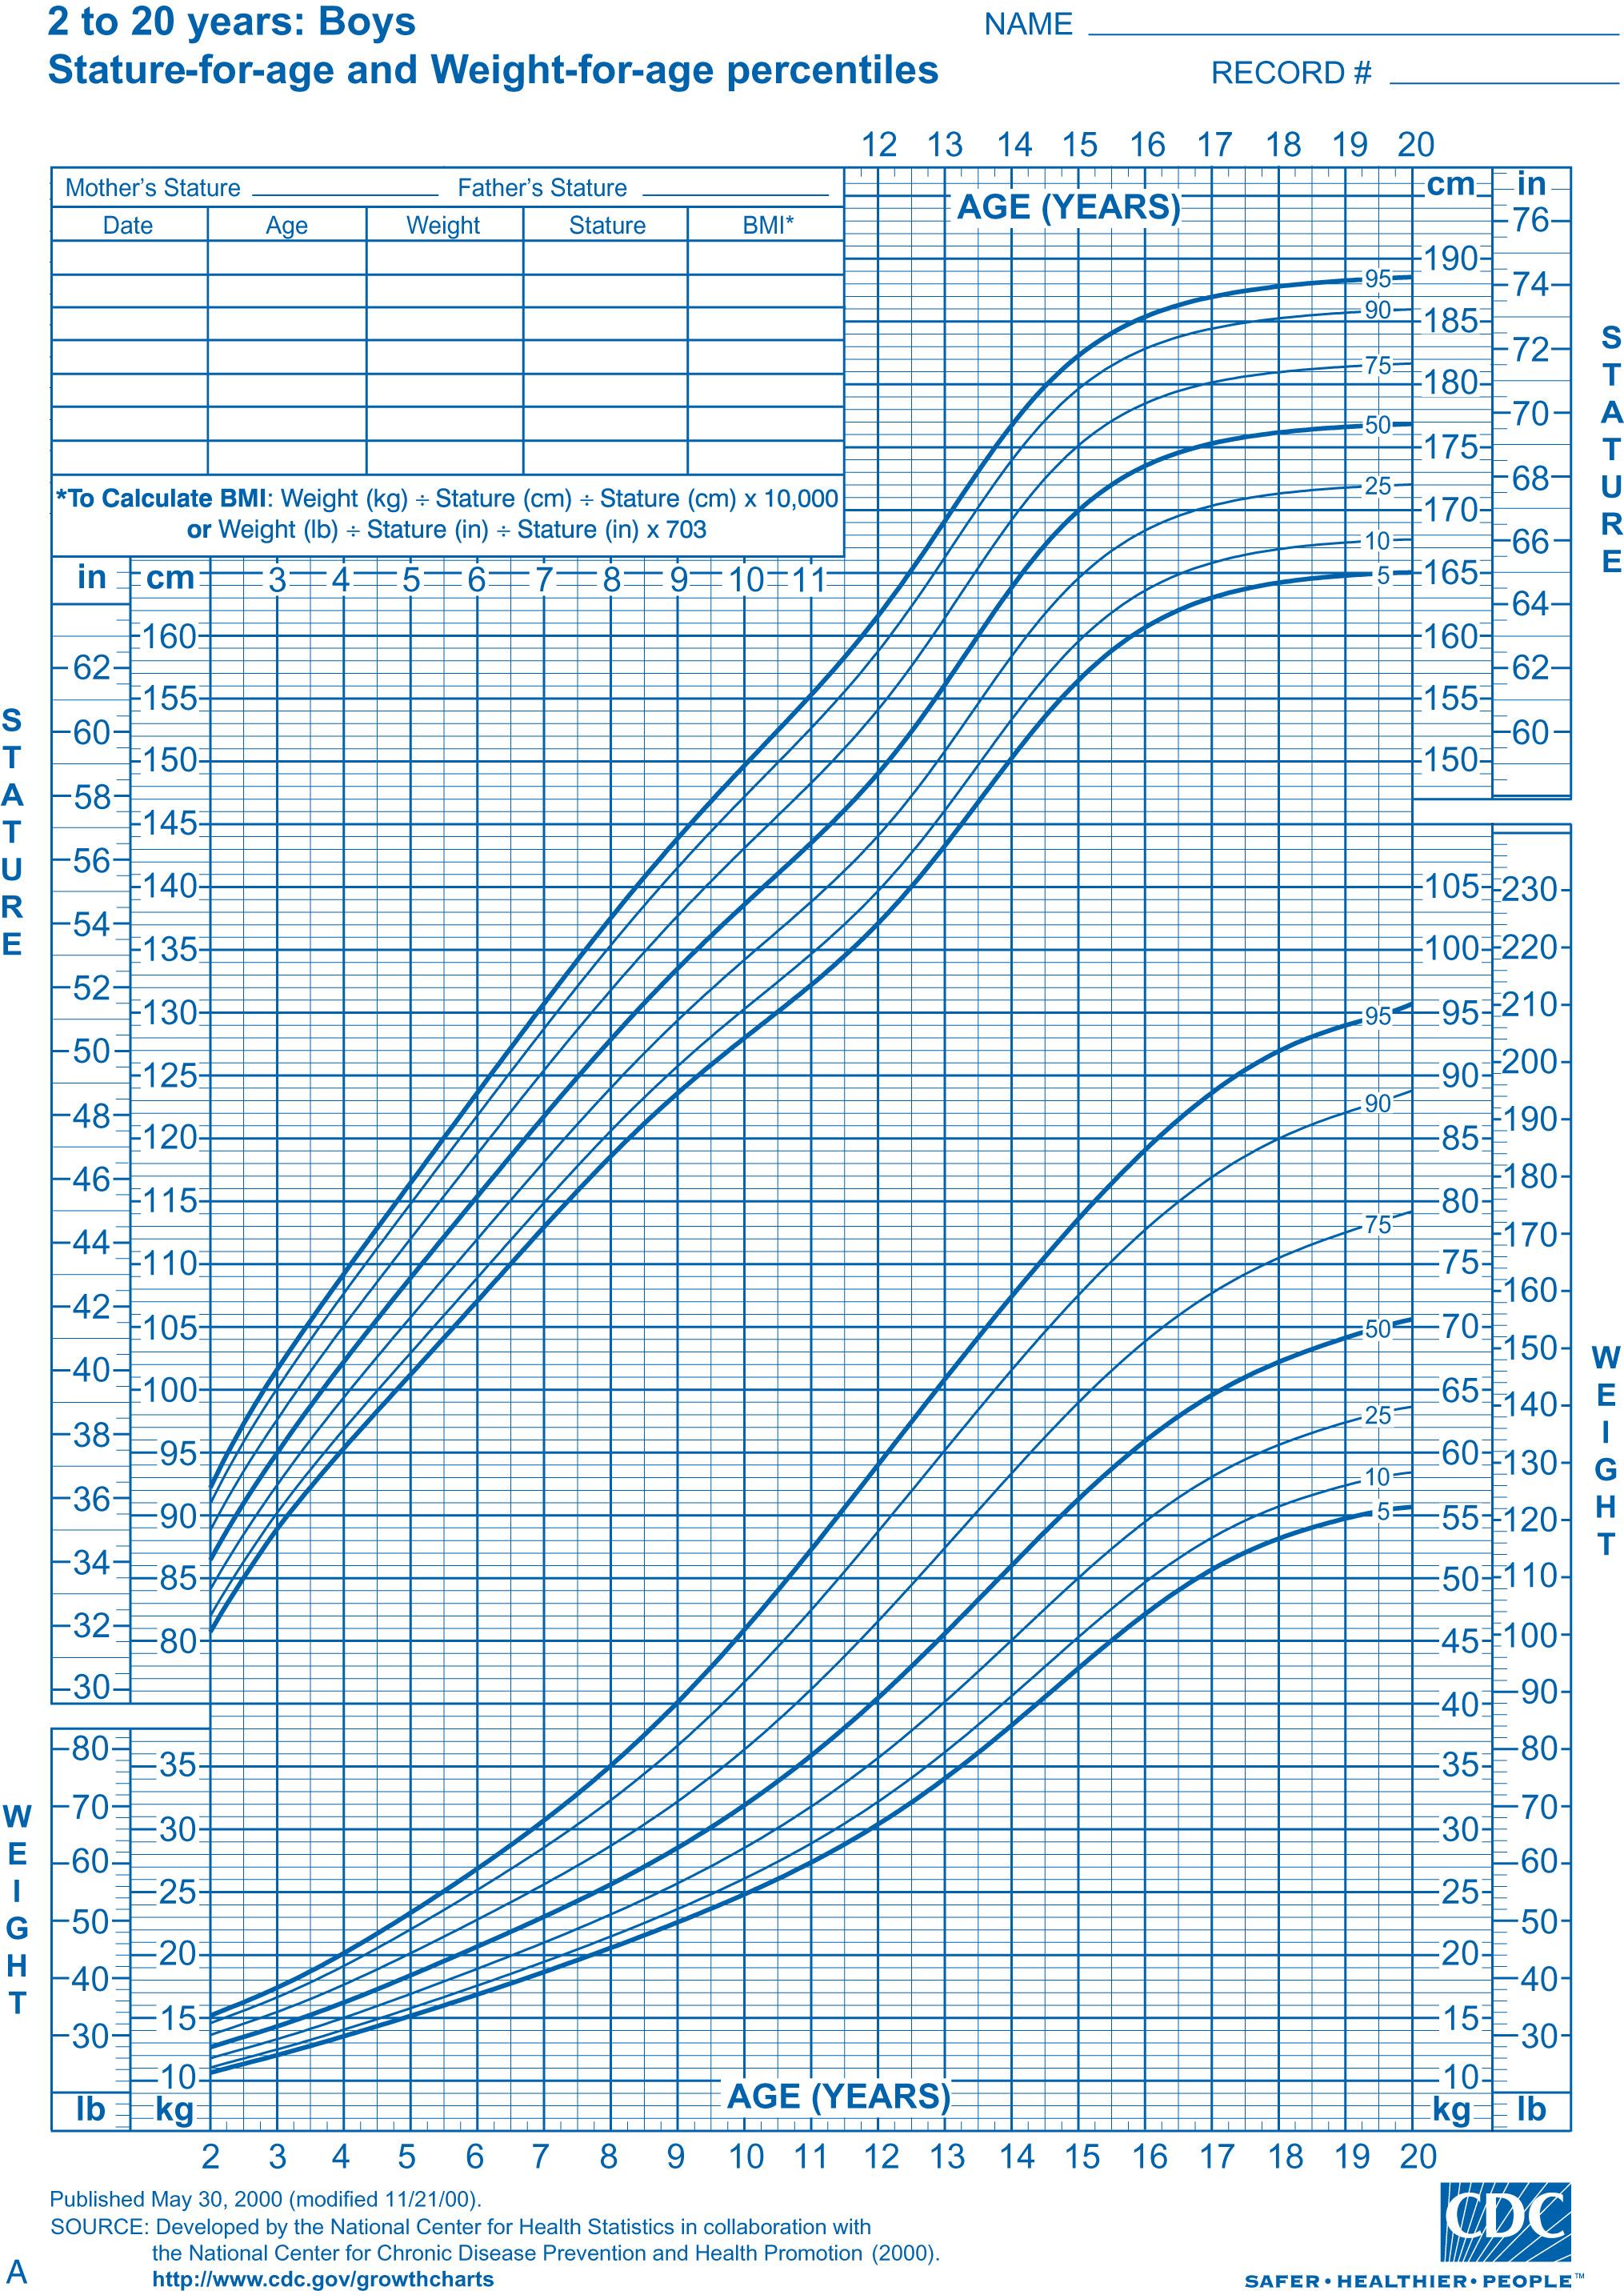 Fig. 25.1, A, Stature (height) for age and weight for boys age 2-20 yr.